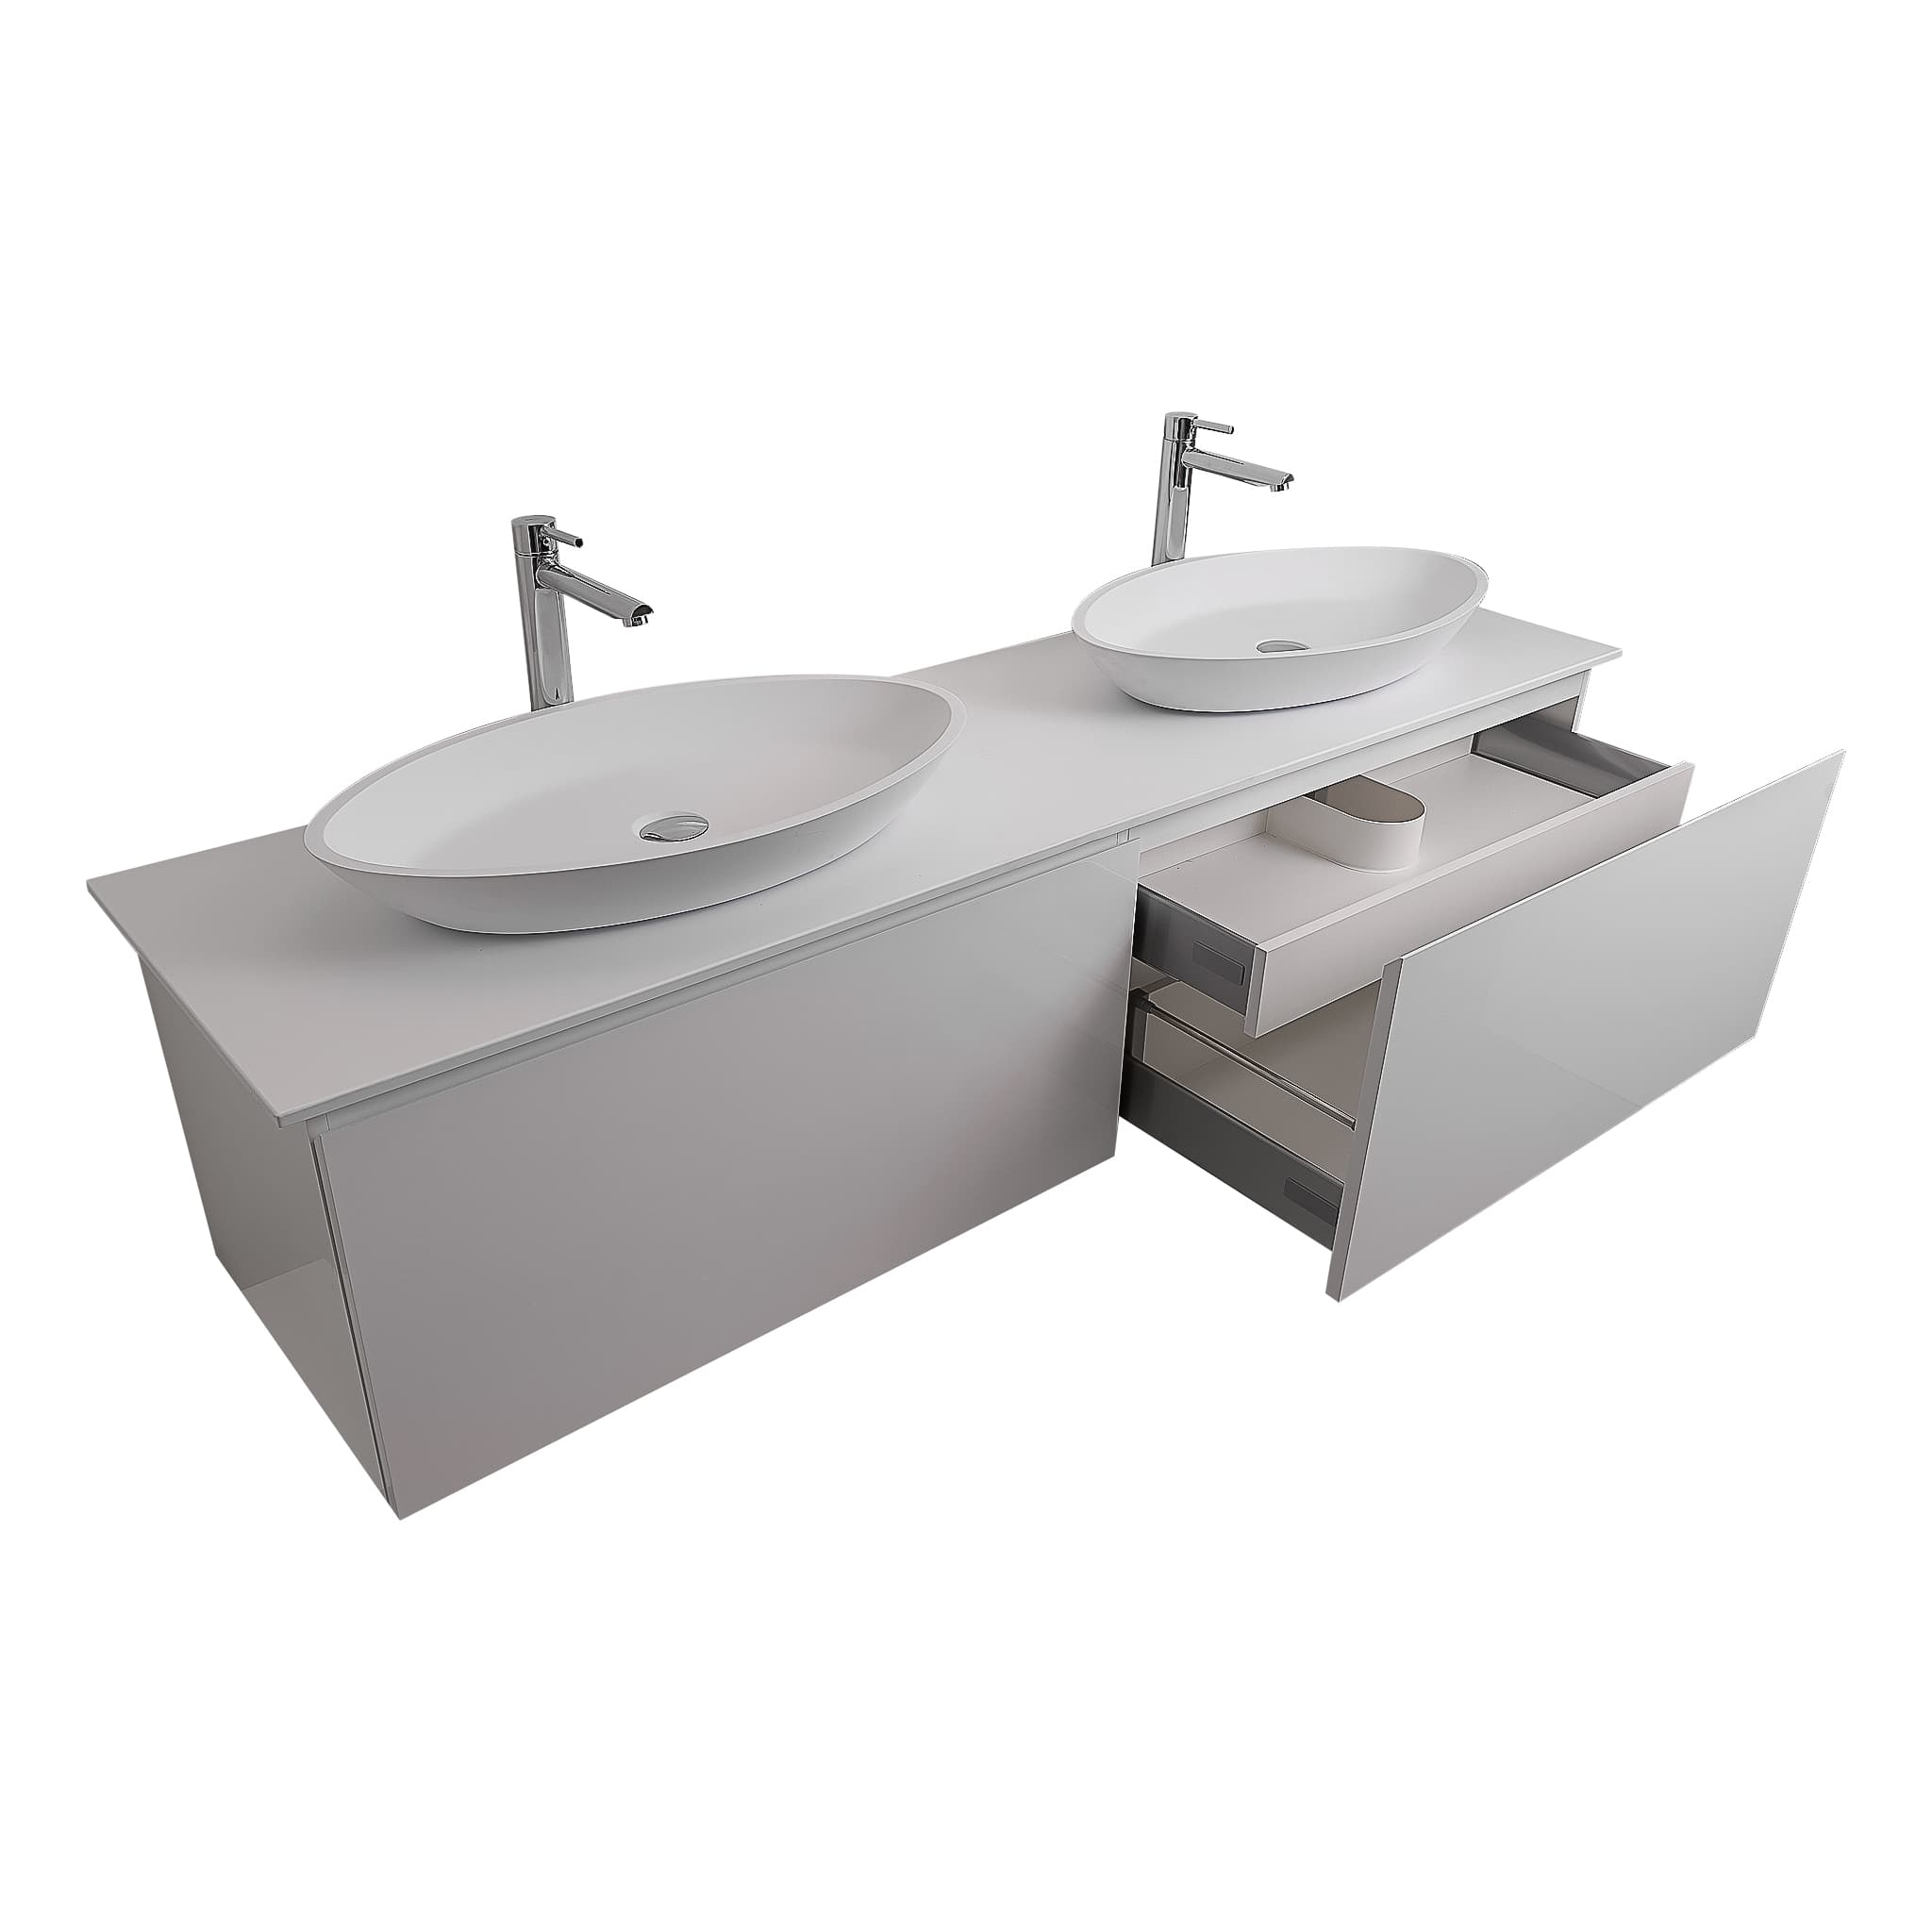 Venice 72 White High Gloss Cabinet, Solid Surface Flat White Counter And Two Oval Solid Surface White Basin 1305, Wall Mounted Modern Vanity Set